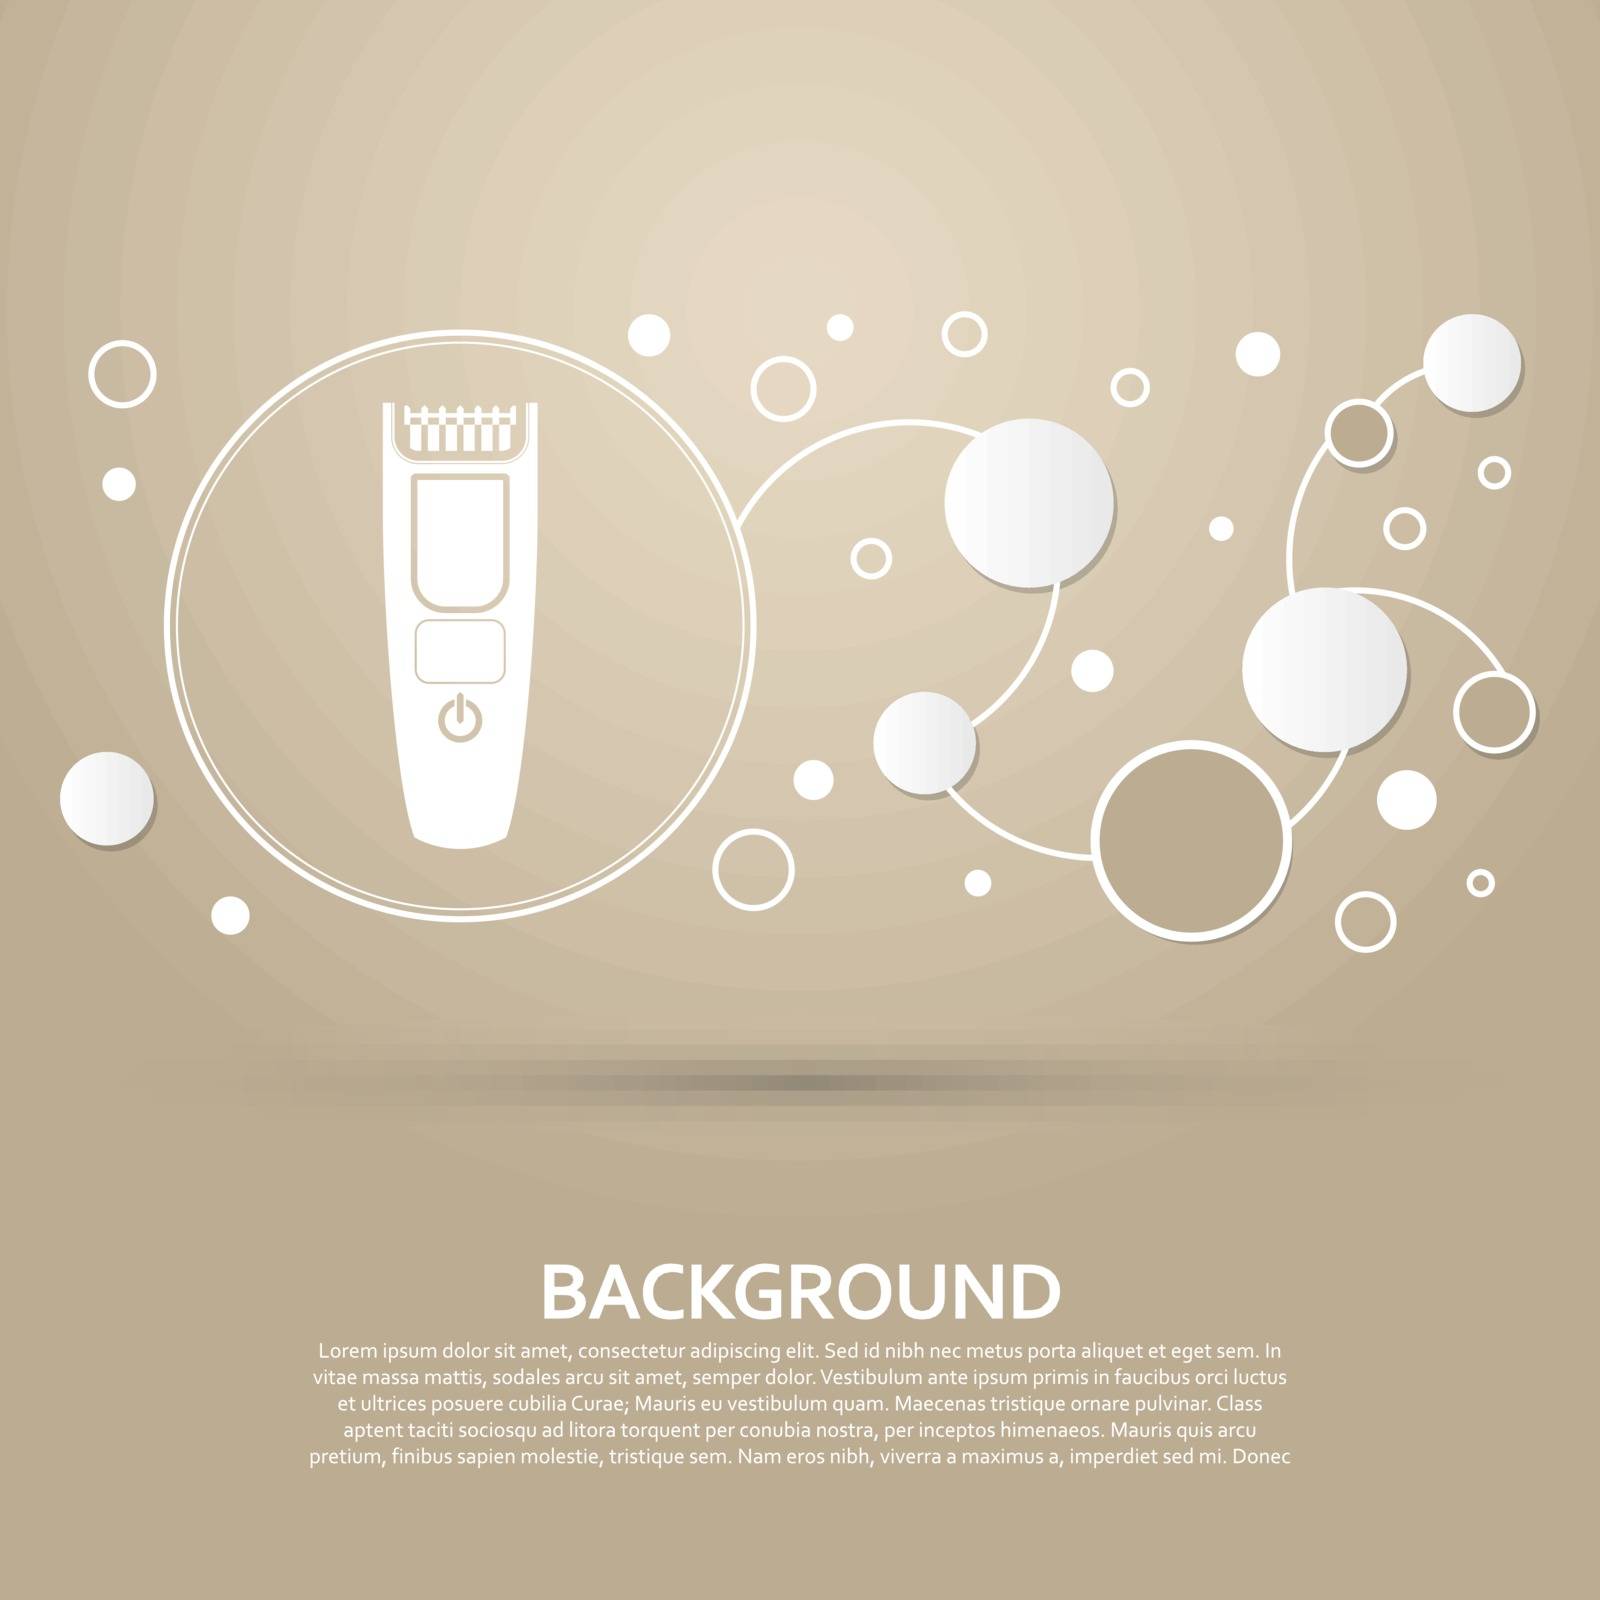 Shaver hairclipper icon on a brown background with elegant style and modern design infographic. Vector by Adamchuk